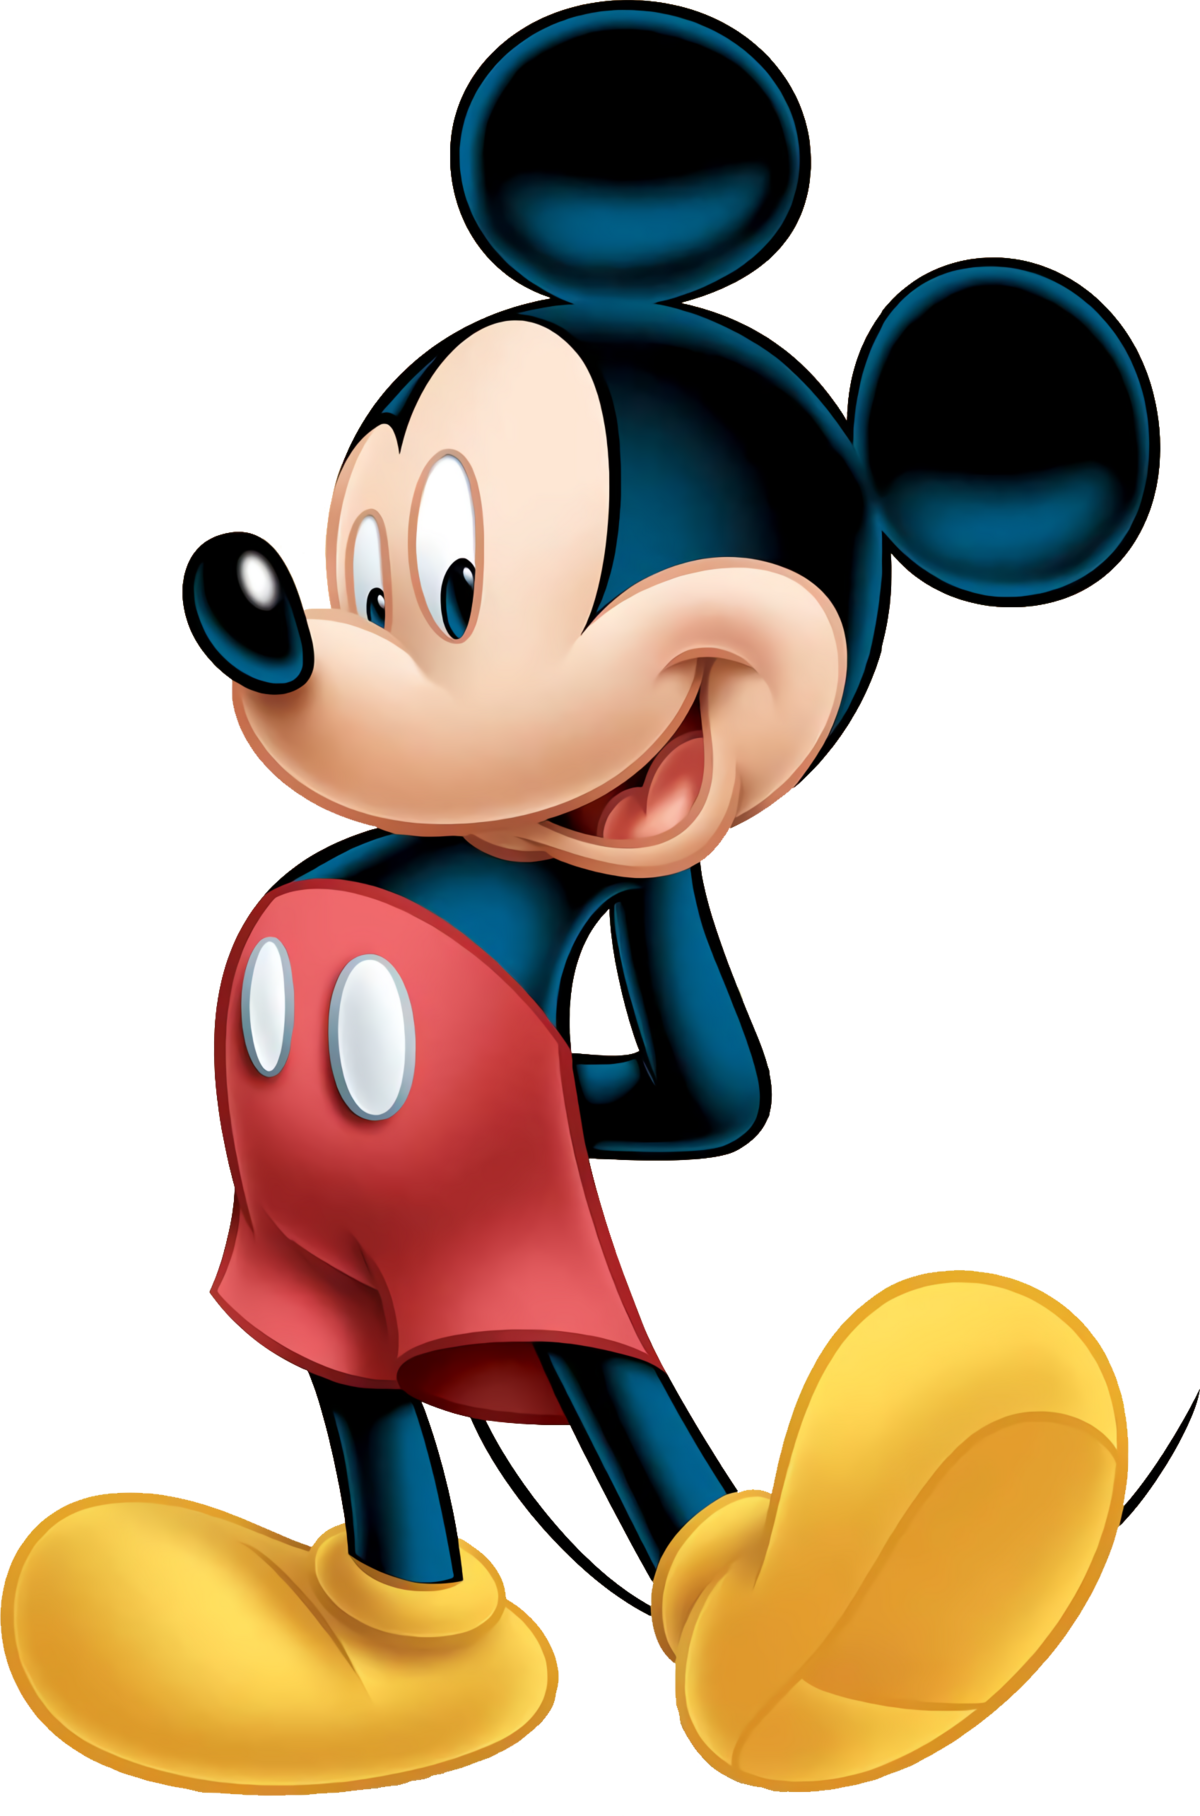 https://static.wikia.nocookie.net/shipping/images/f/f8/Mickey_Mouse_Character_Cover.png/revision/latest?cb=20230910231924